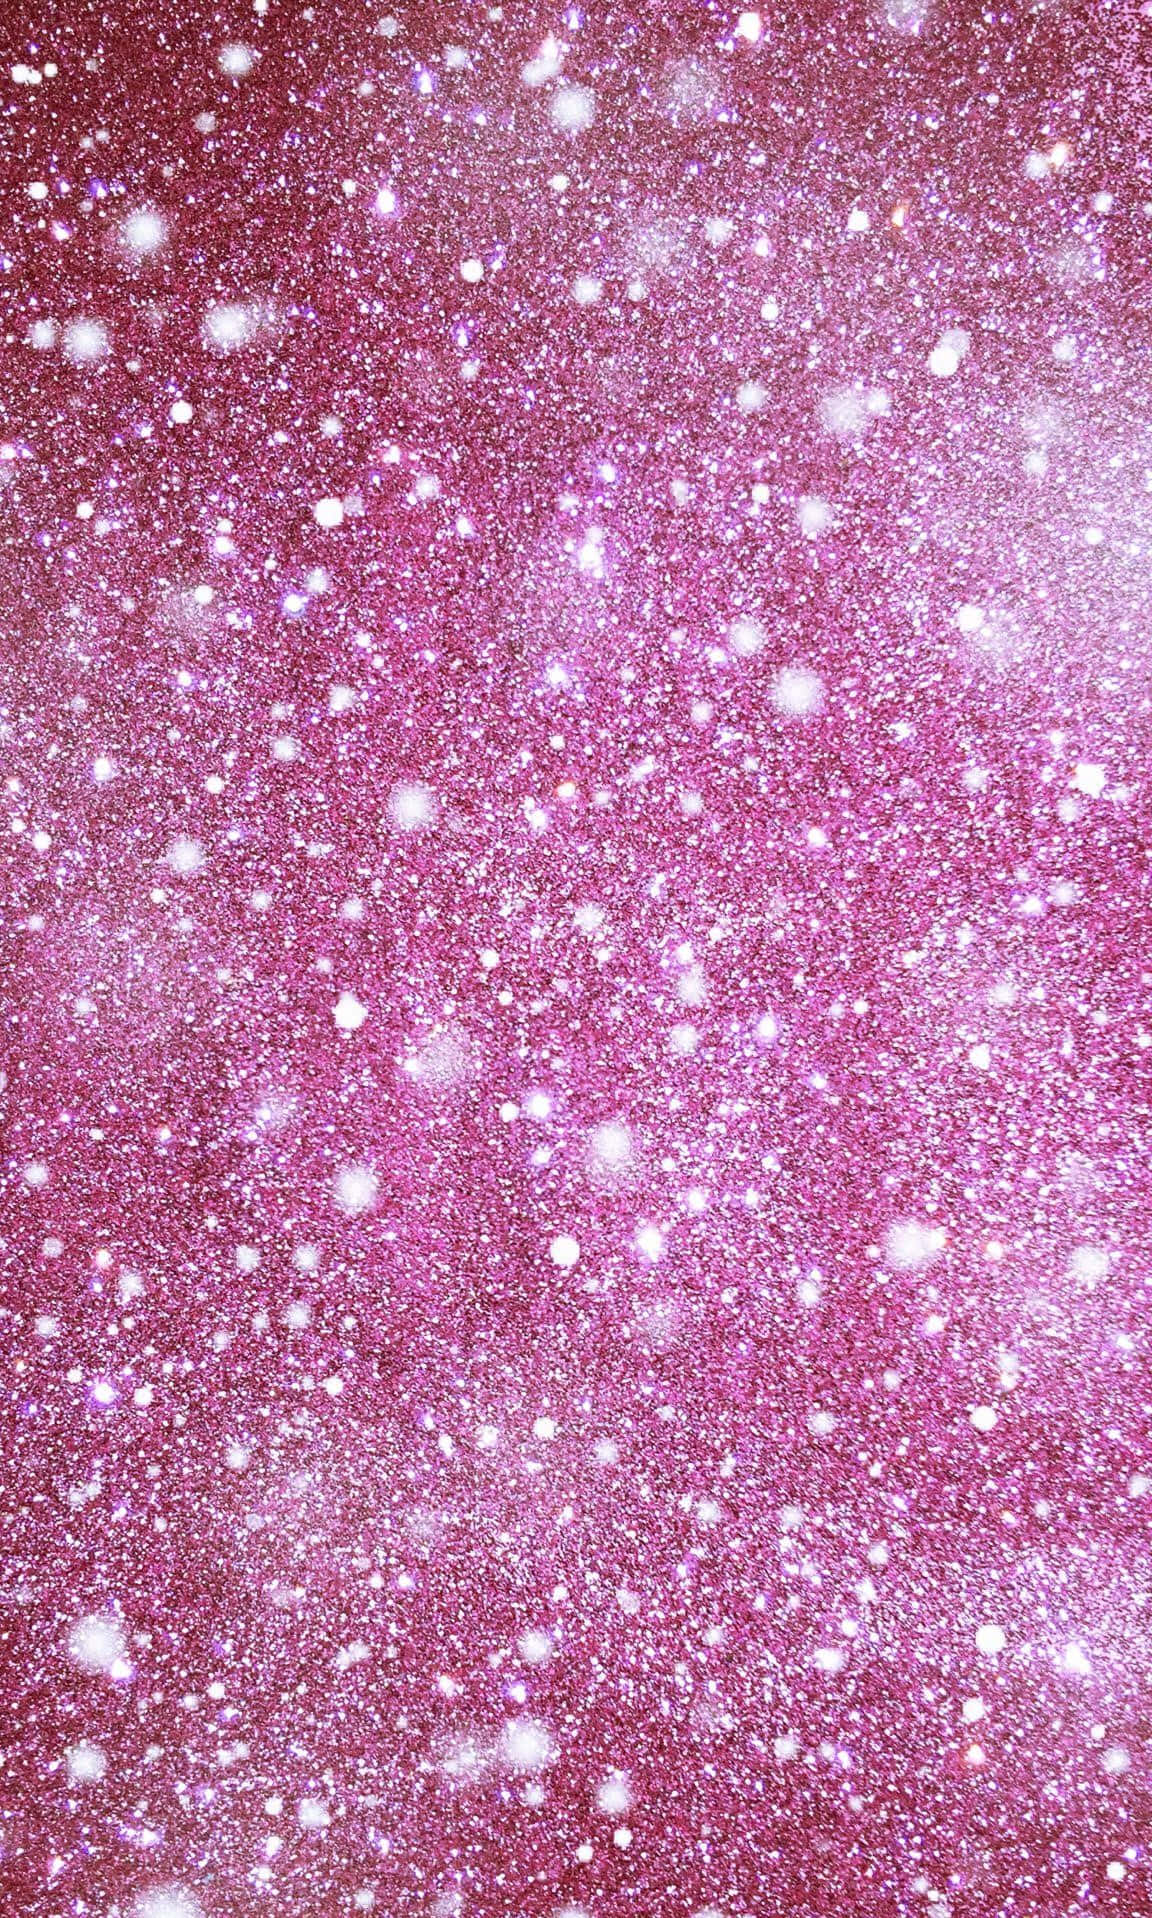 Let your imagination sparkle with a dazzling sparkly background